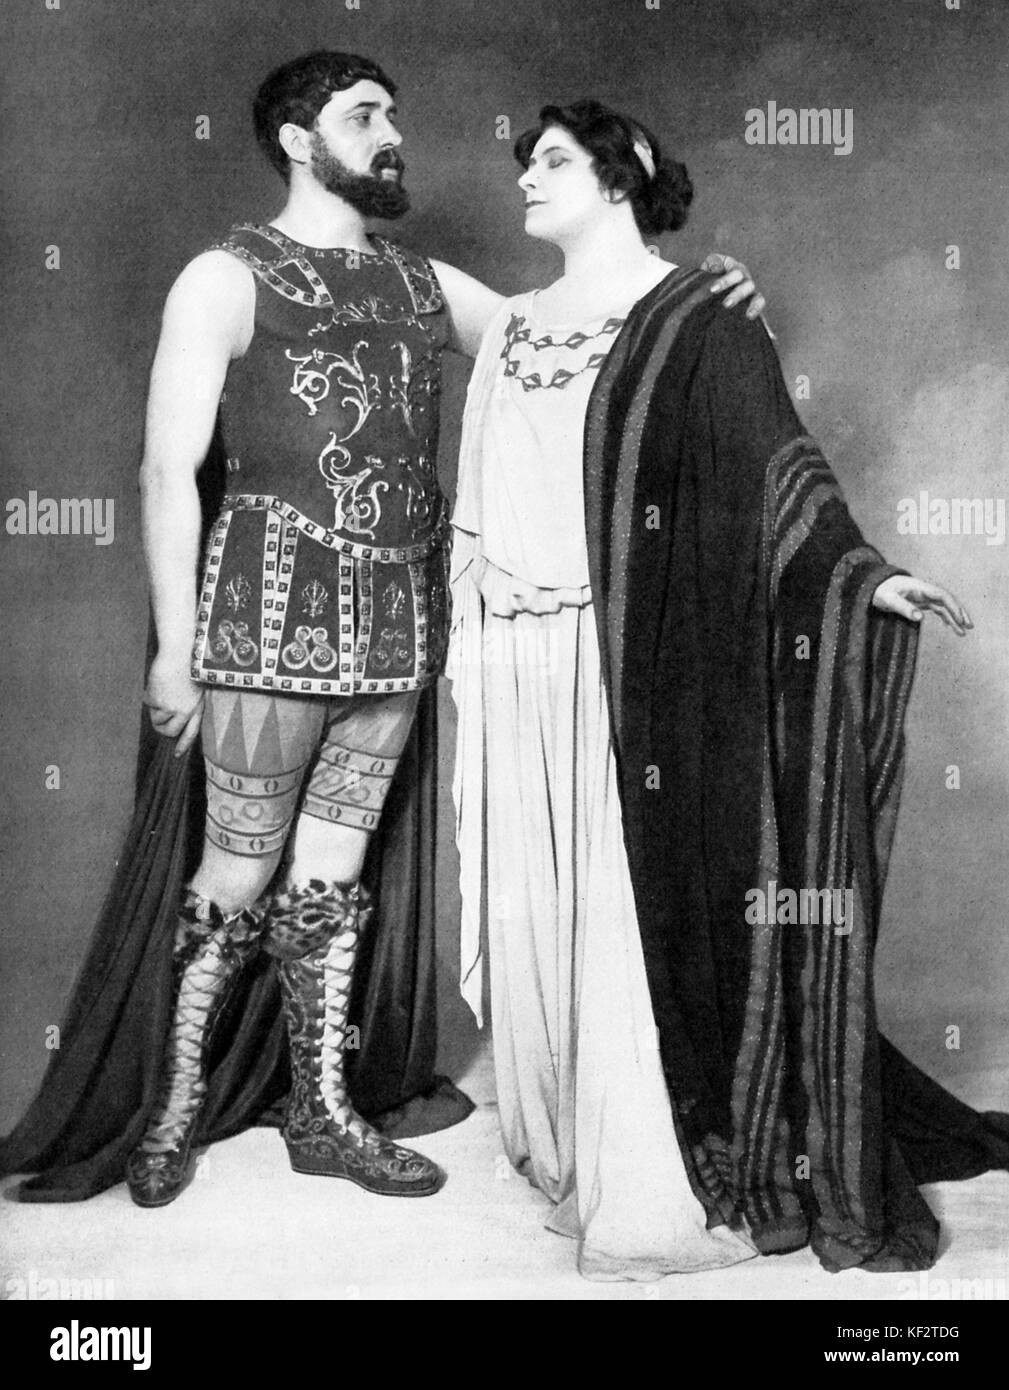 Penelope played by Lucienne Breval and Ulysse played by Muratore in ' Penelope ' , opera by Gabriel Fauré. Performance at Theatre des Champs Elysees, Paris, 10 May 1913. Photo by Gerschel. GF: French composer, 12th May 1845 - 4th November 1924. Stock Photo